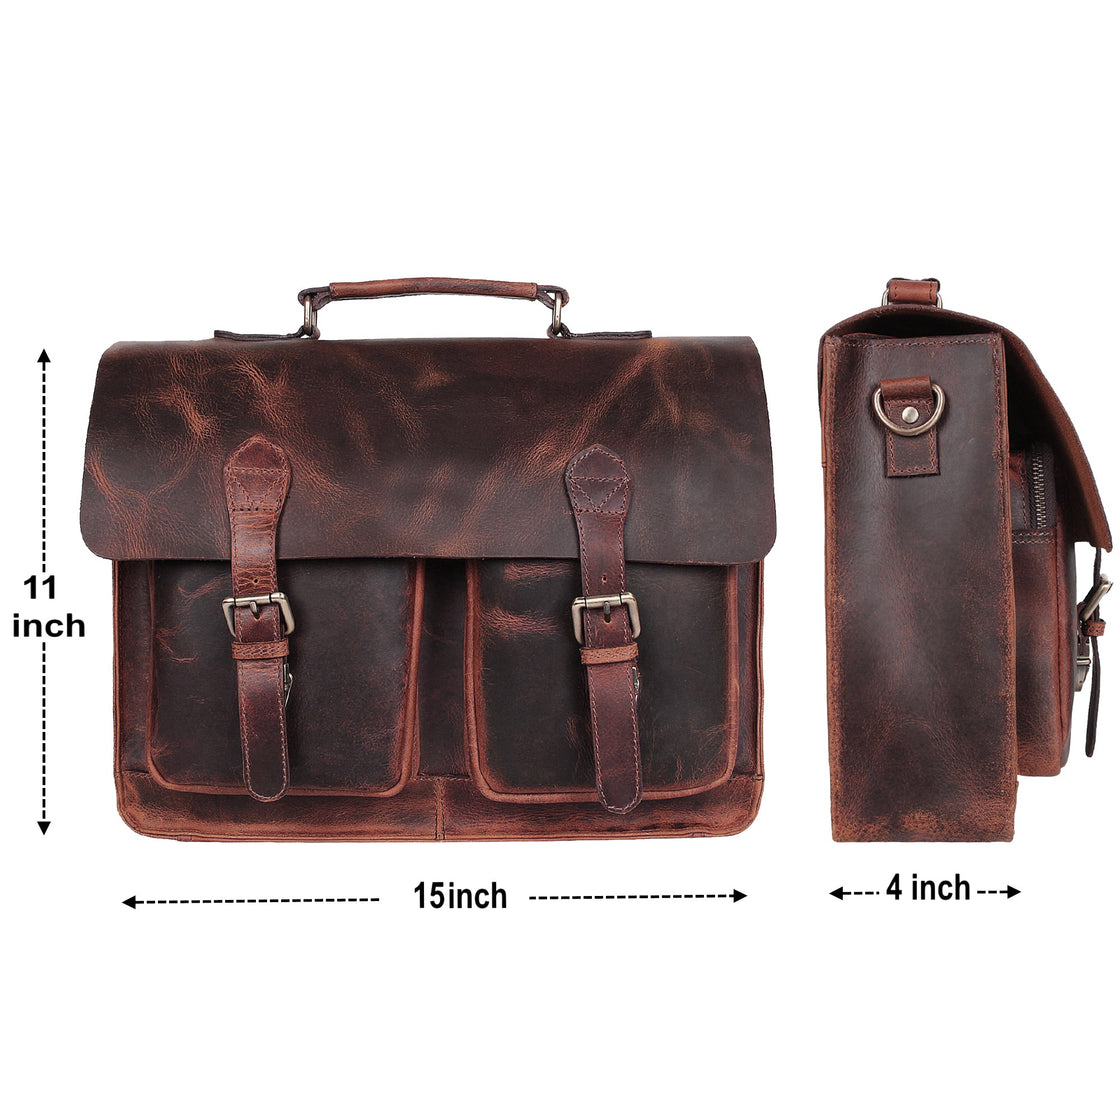 15 Inch Buffalo Leather Laptop Messenger Briefcase Bag (Mulberry)